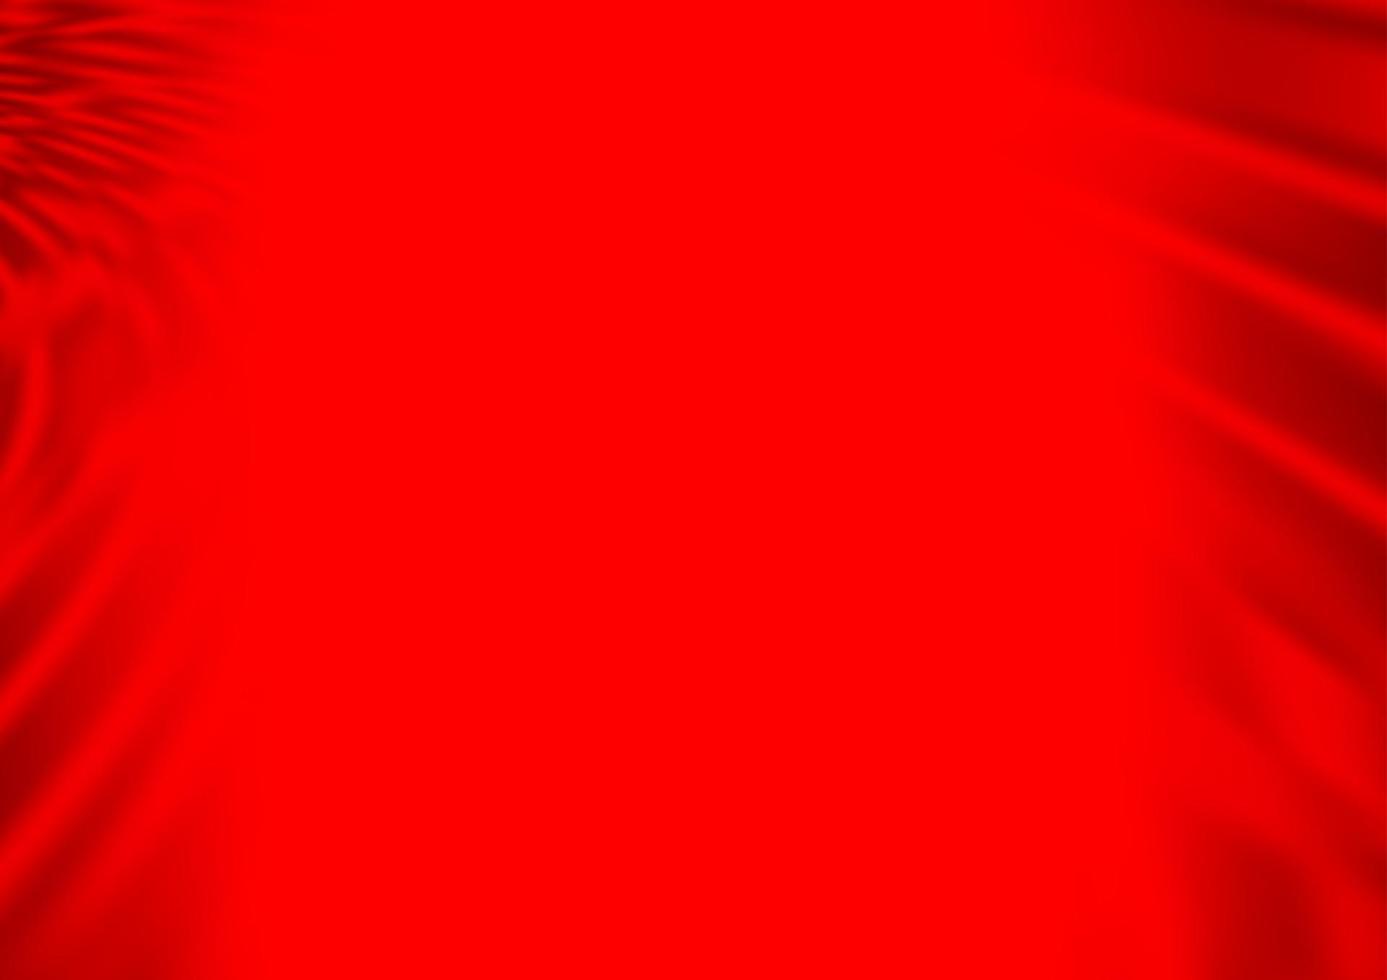 Light Red vector blurred shine abstract pattern.